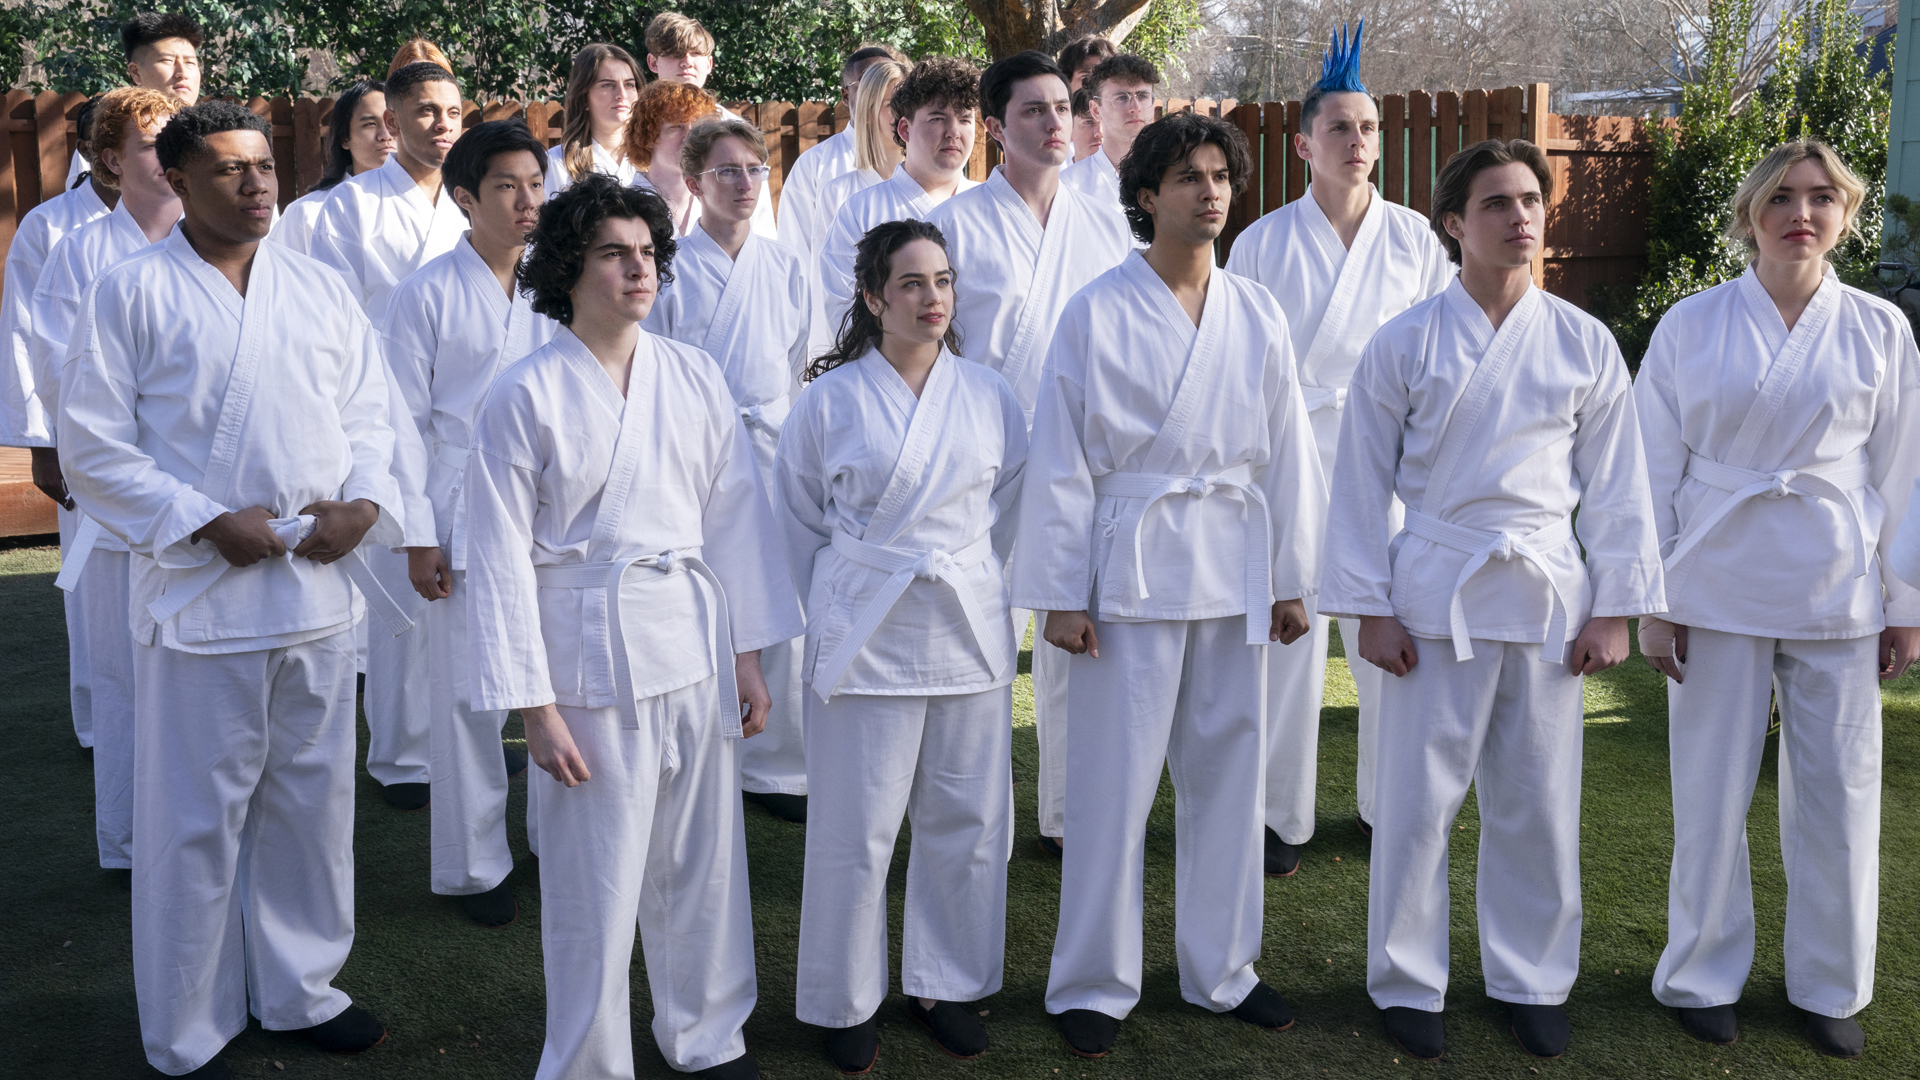 A group of karate students stand close together in a garden in Cobra Kai season 6